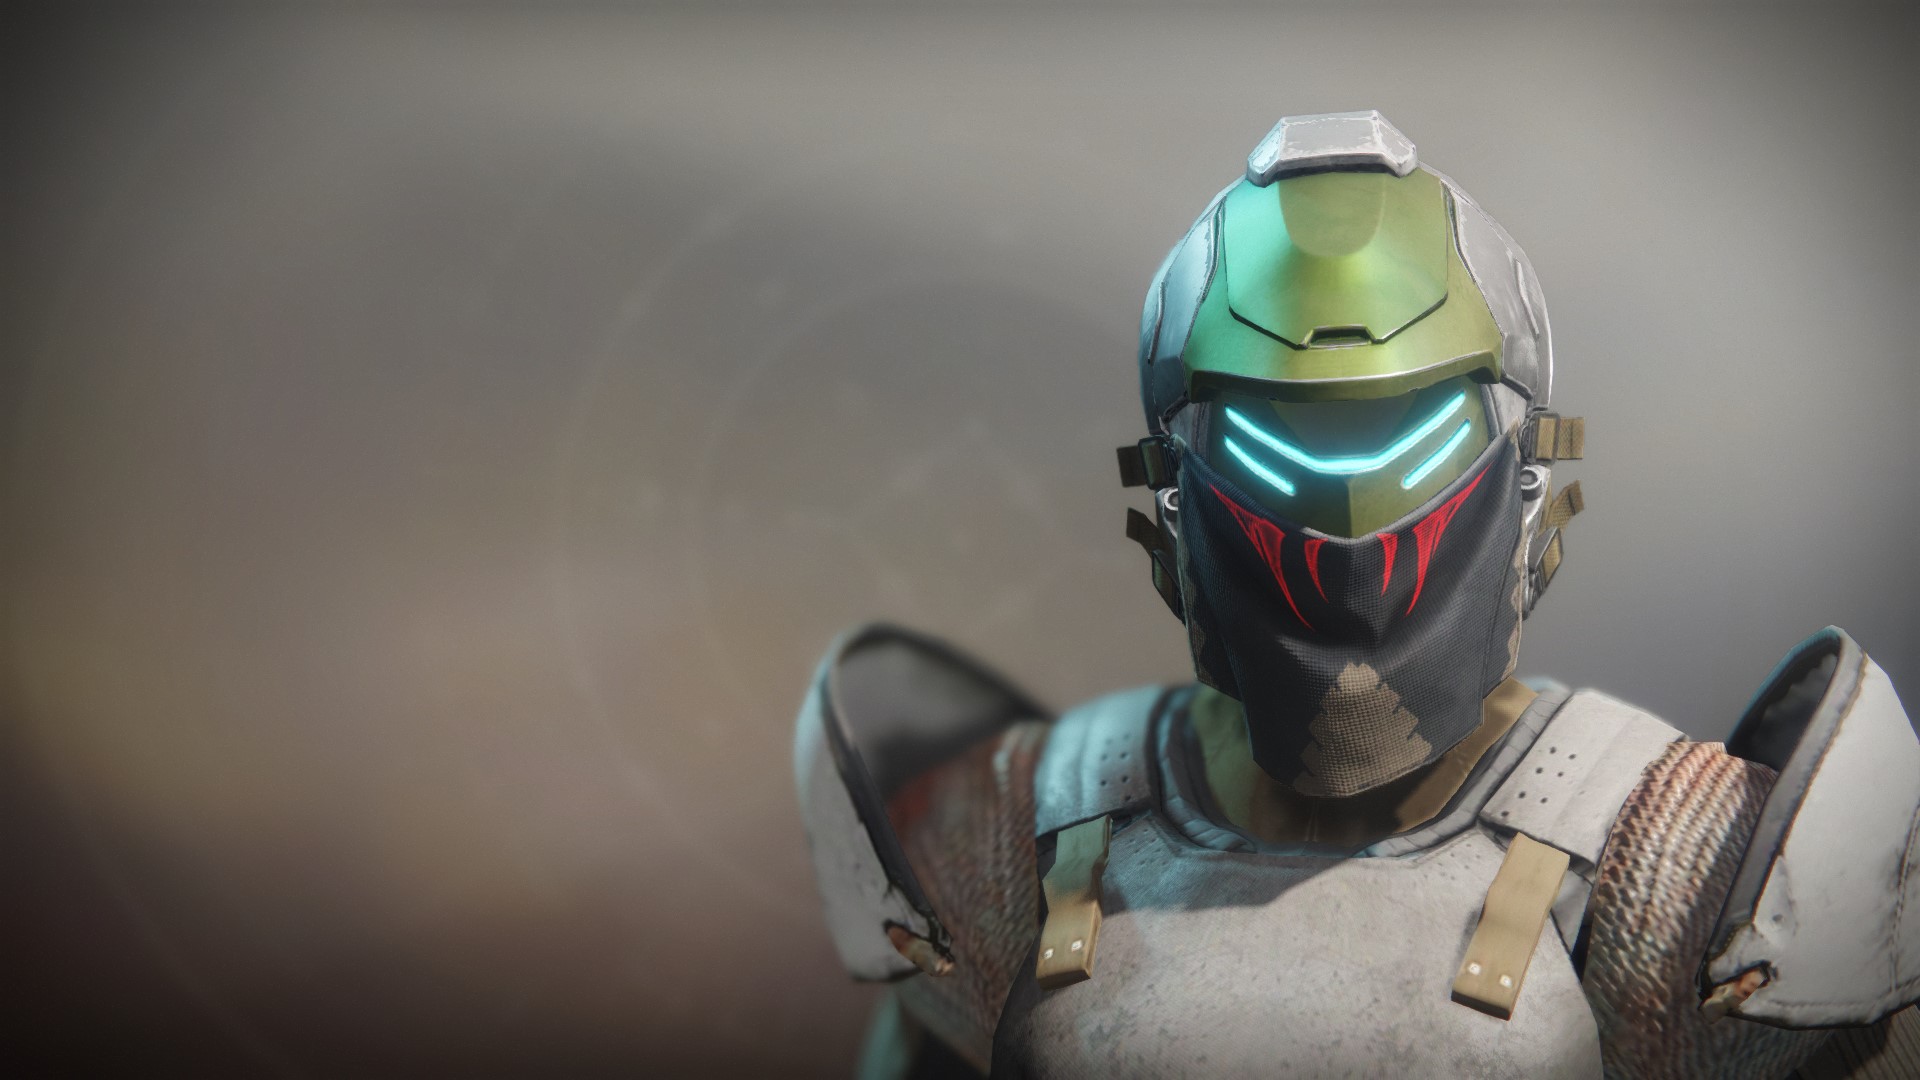 An in-game render of the Illicit Invader Helm.